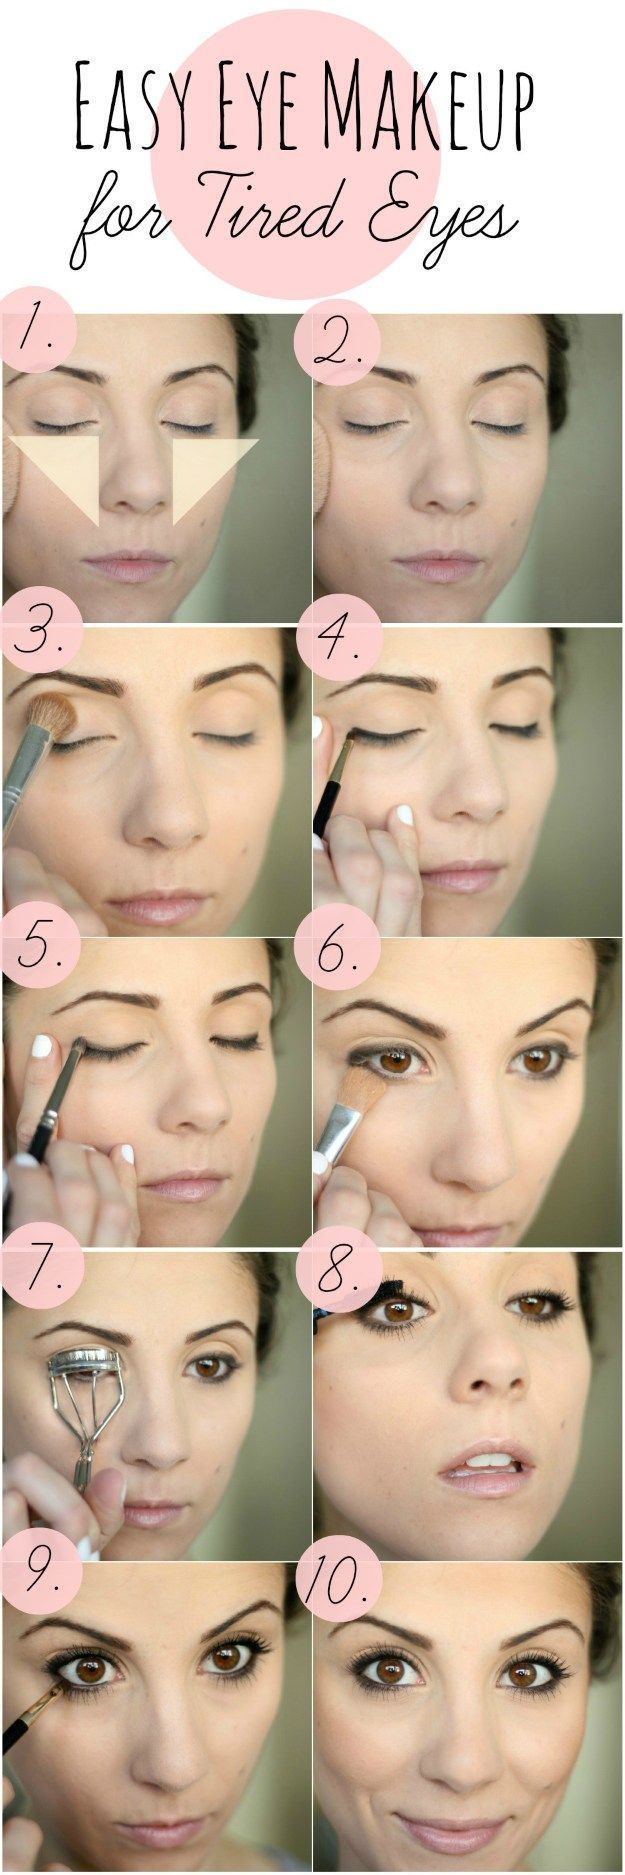 How to Hide Tired Eyes | Undereye Makeup Tips by Makeup Tutorials at | Makeup Tu...